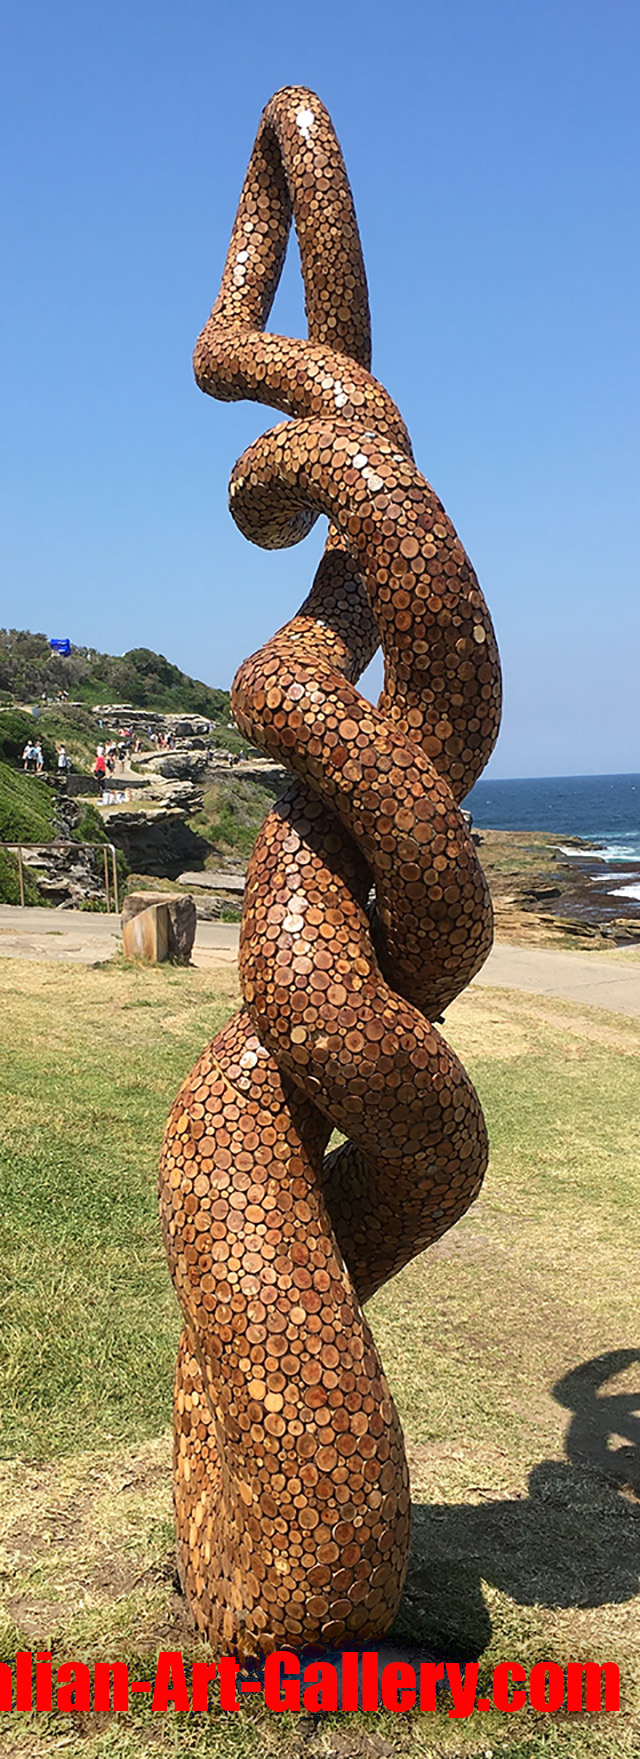 Sculpture by the Sea 2019 